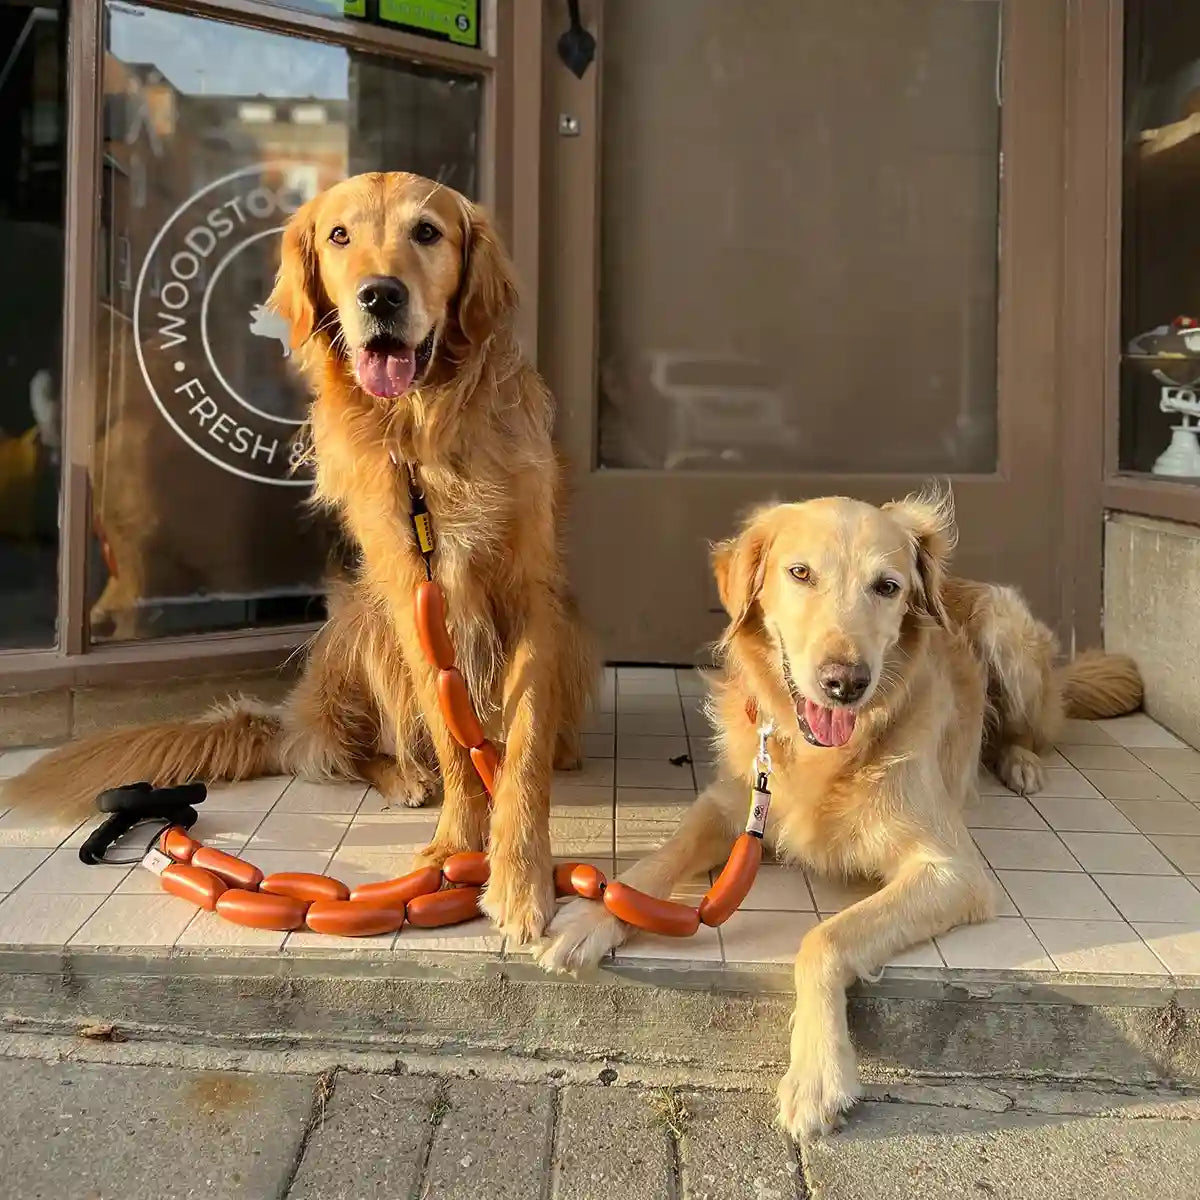 Lovely golden retriever twins love using our Hotdog sausage lead